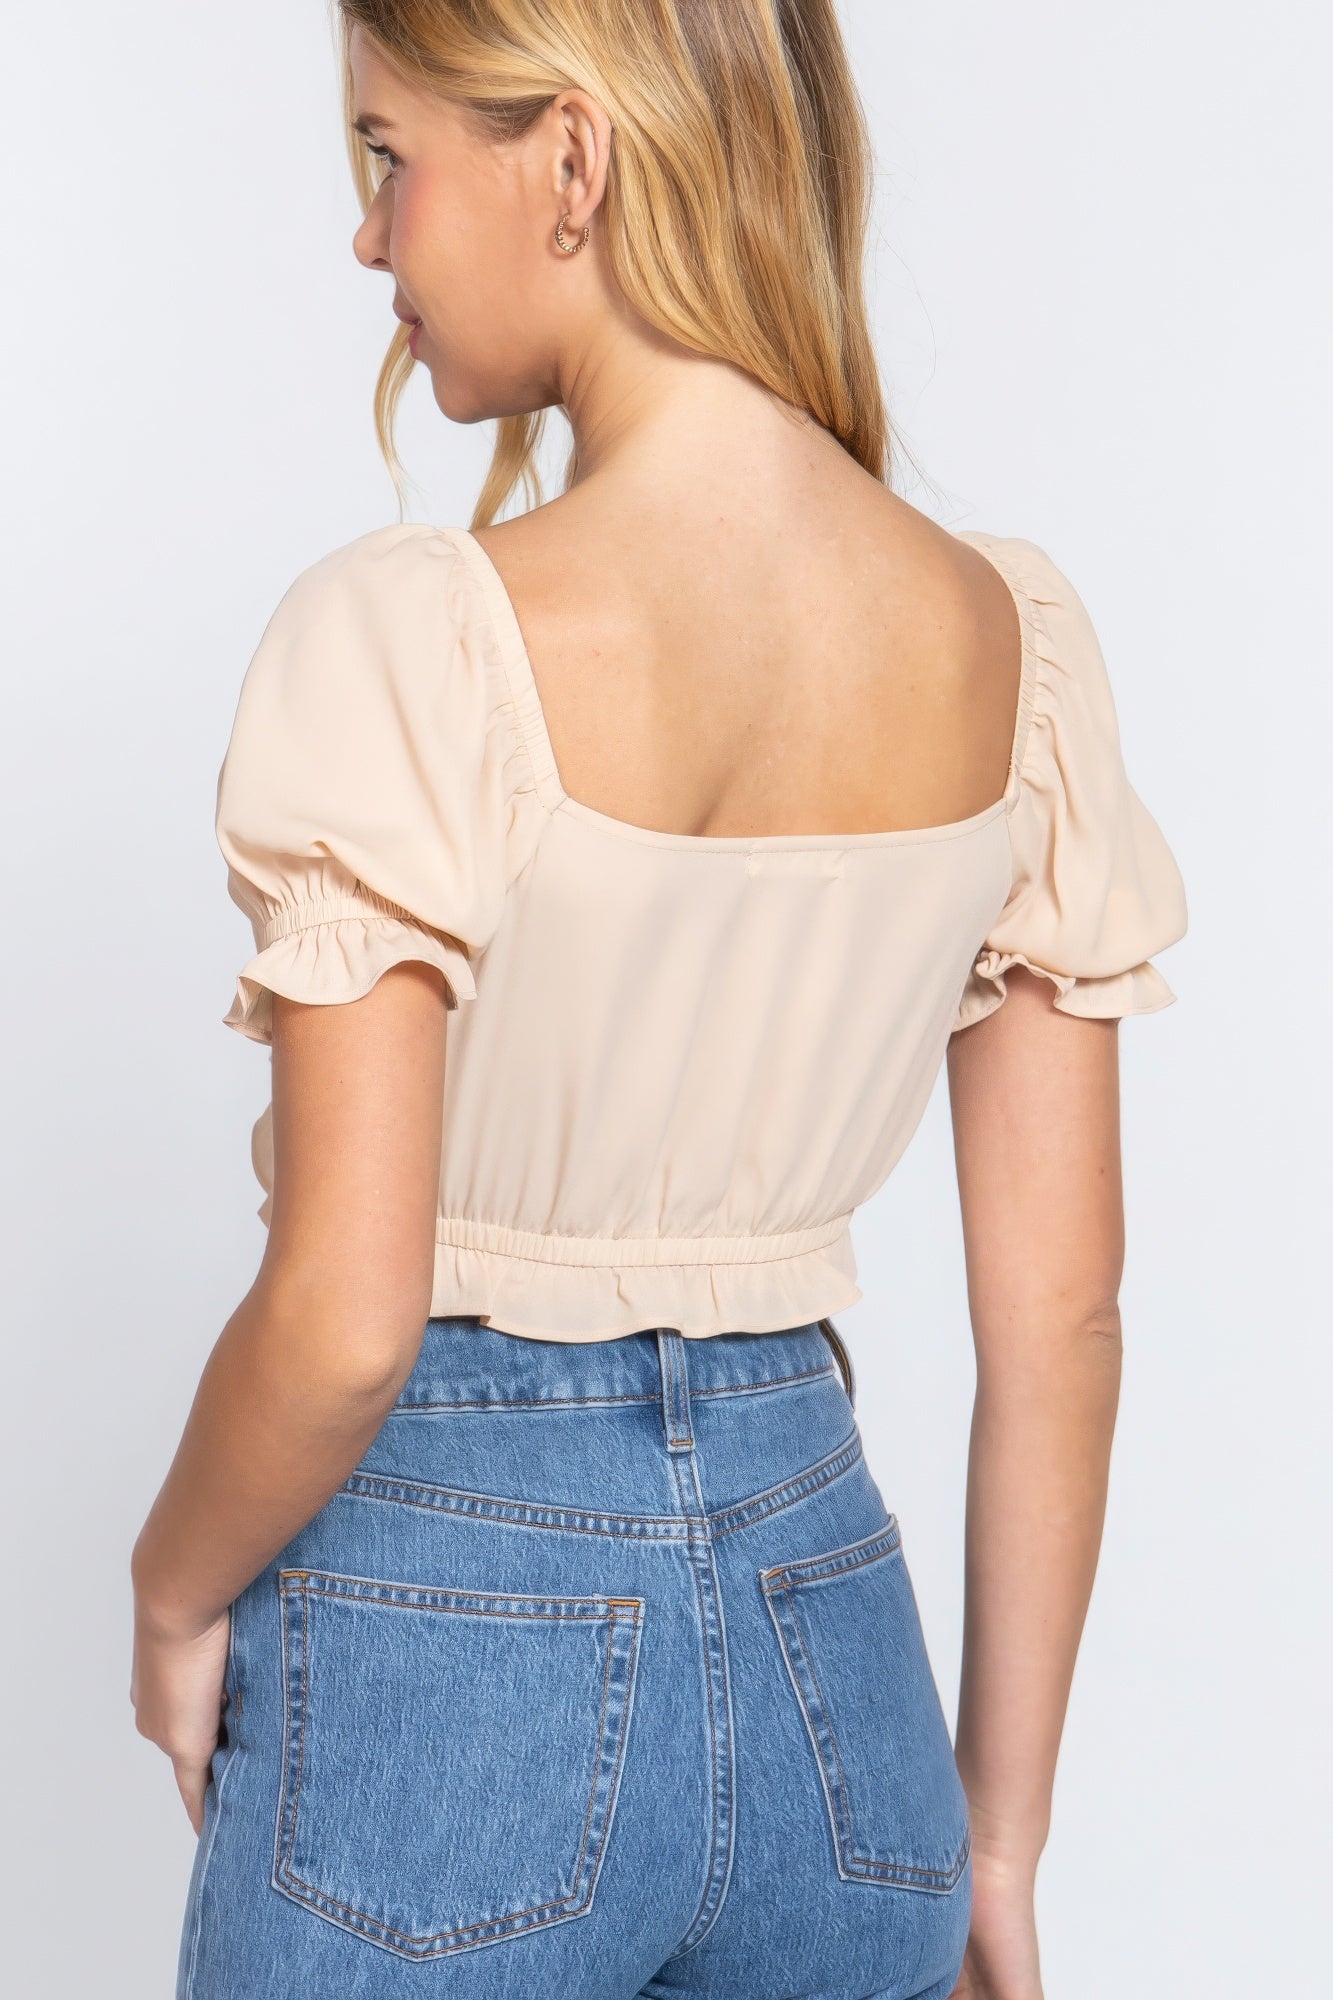 THE IVY Short Slv Print Crop Woven Top